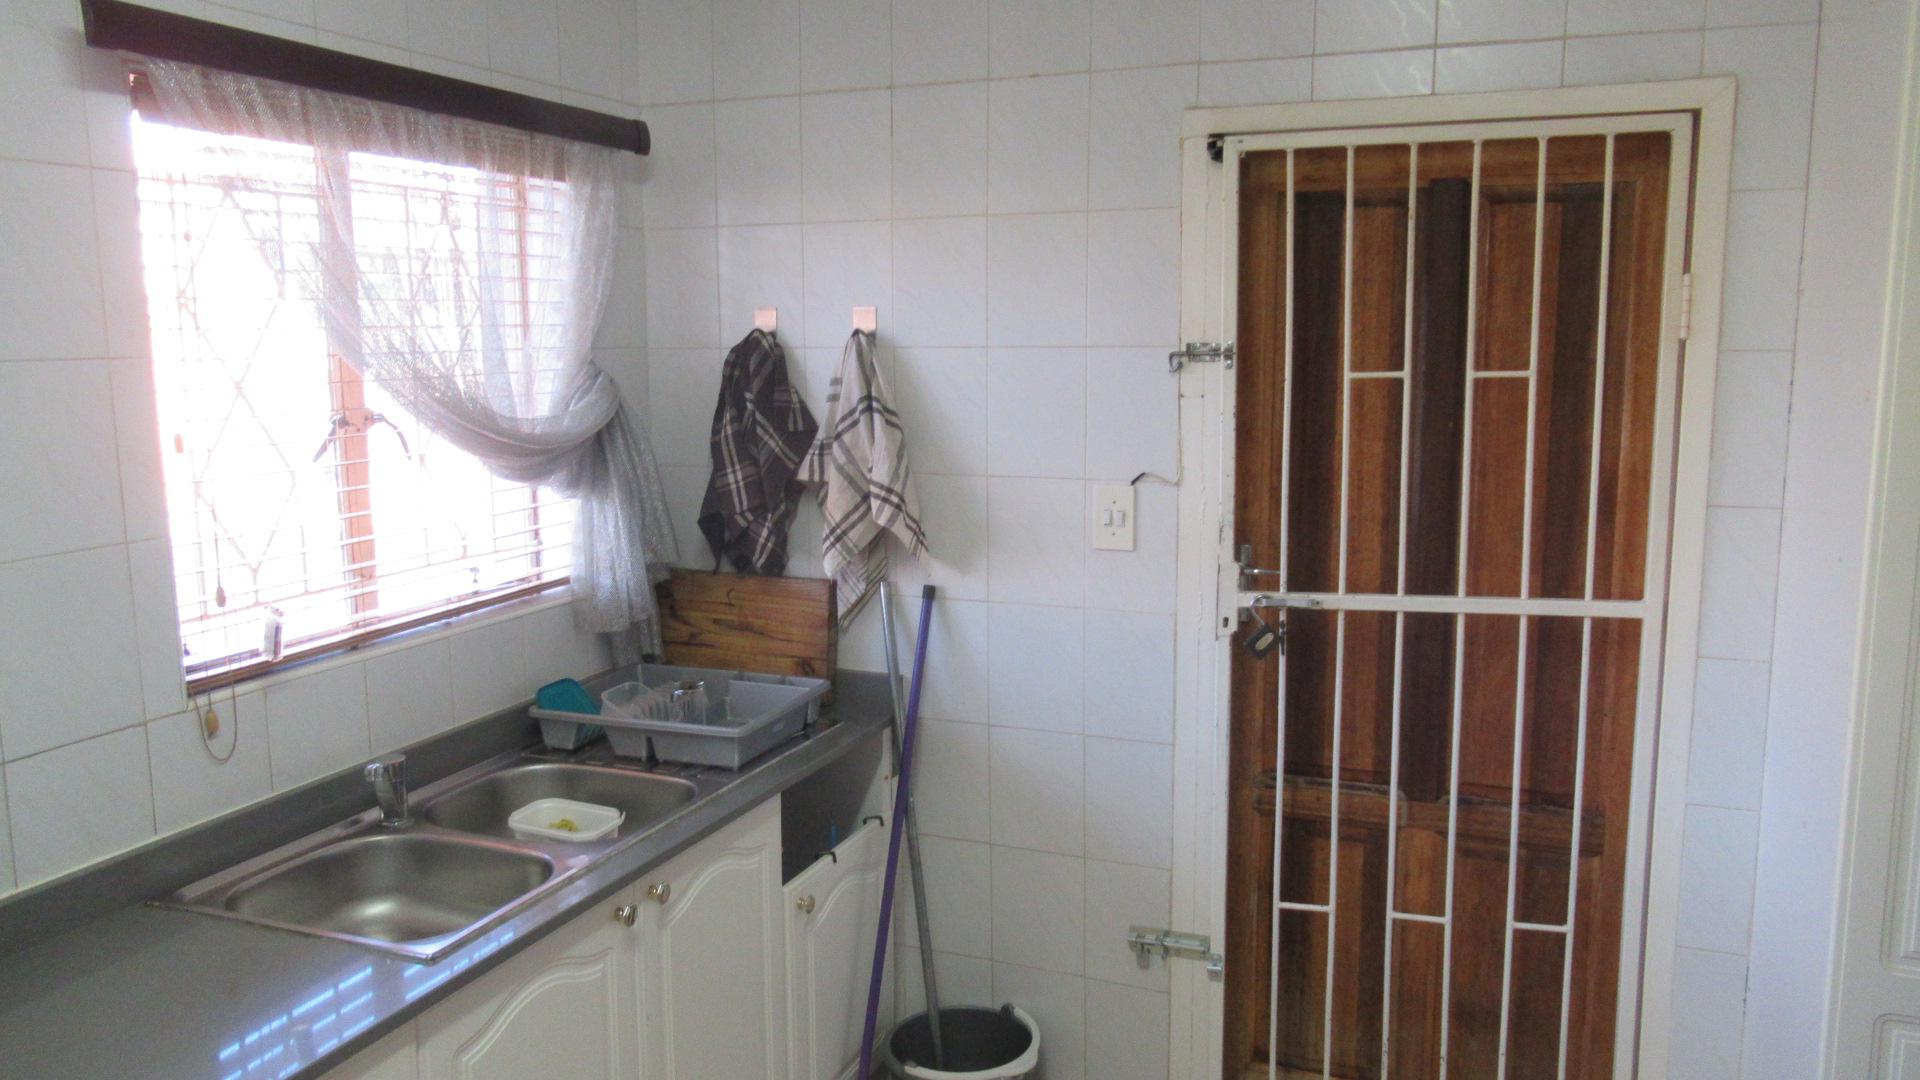 Kitchen - 31 square meters of property in Mindalore